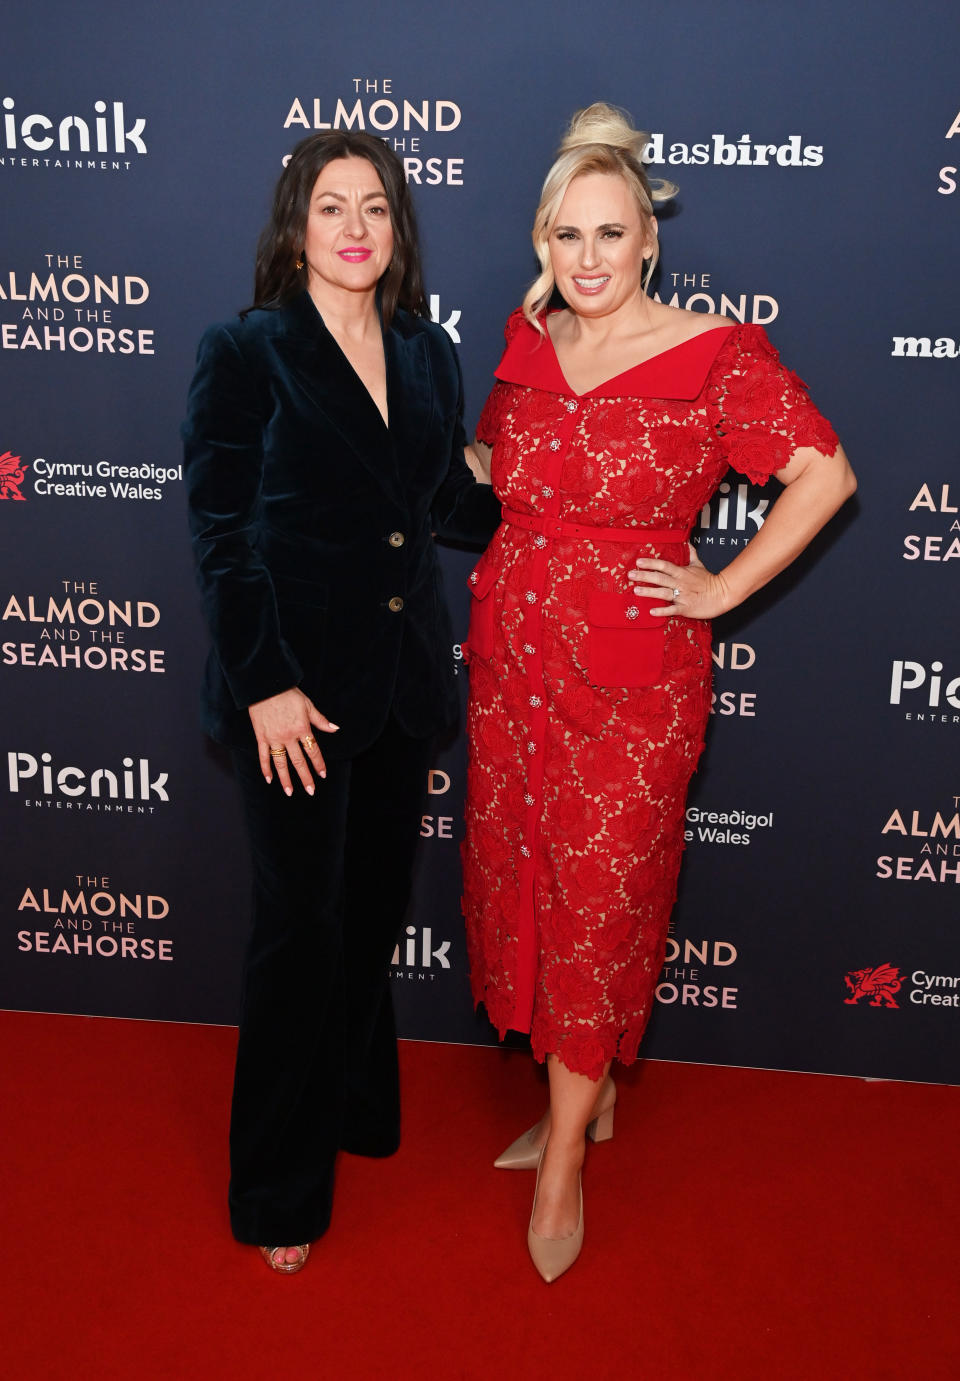 Rebel Wilson attends the UK Premiere of "The Almond And The Seahorse"  in London in pointed-toe pumps